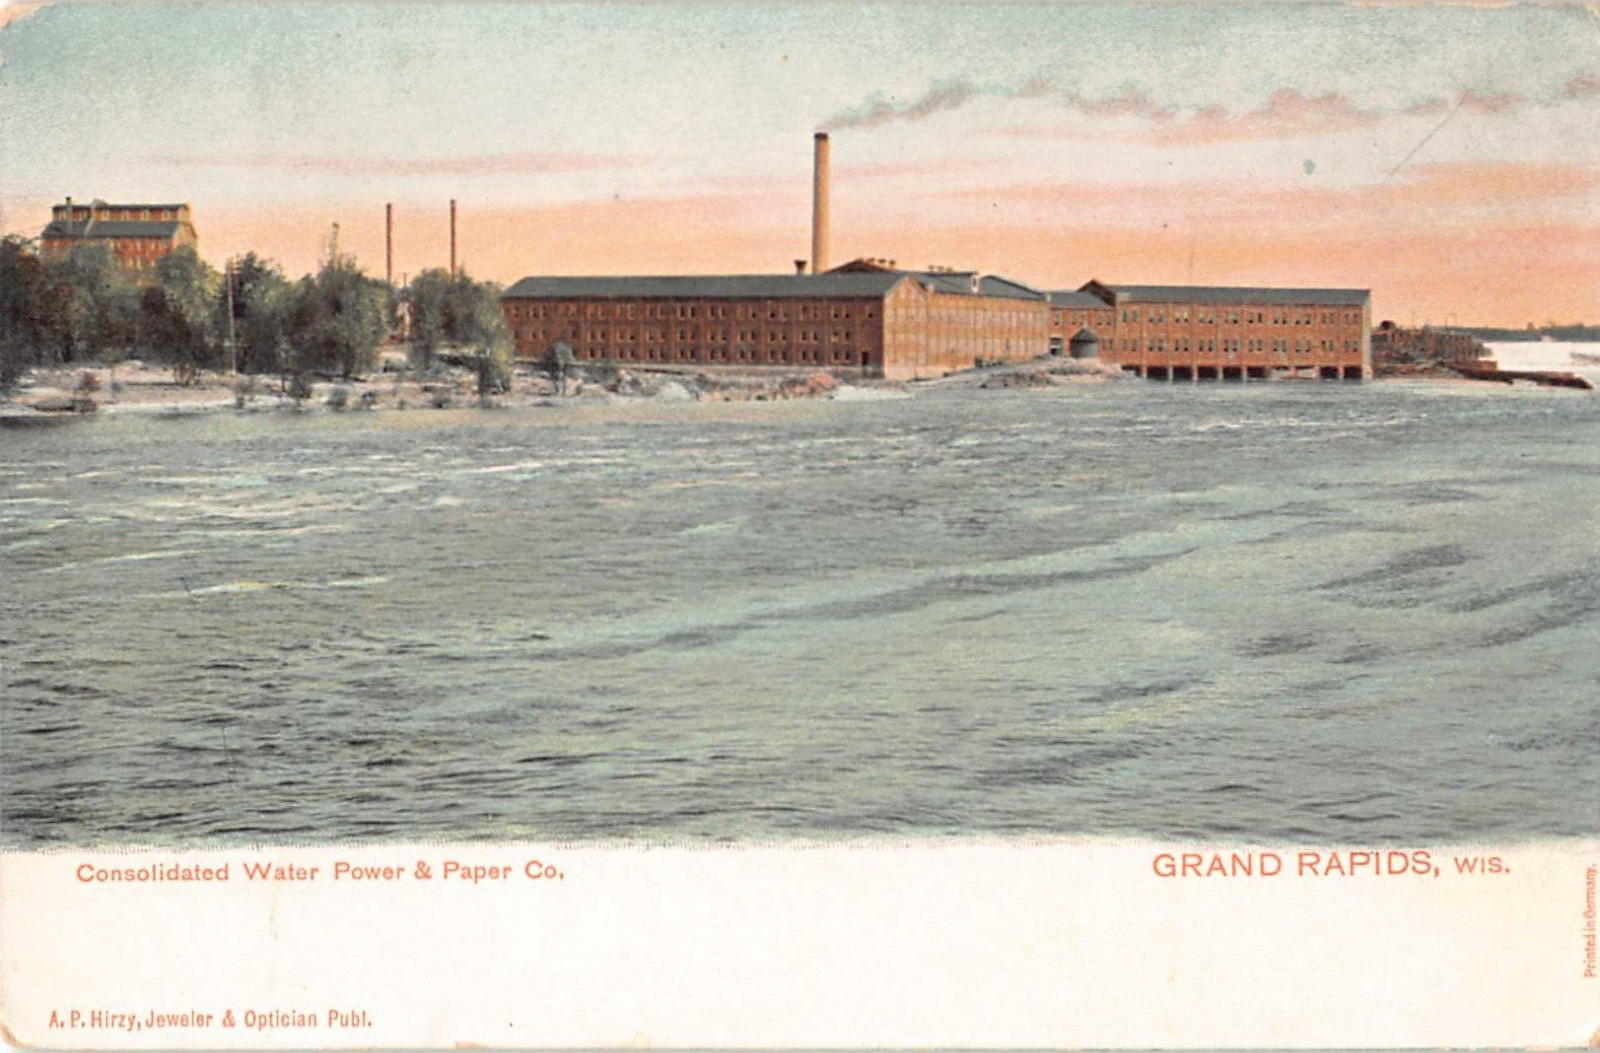 Consolidated Water Power & Paper Co., Grand Rapids, Wisconin-Very Old Postcard